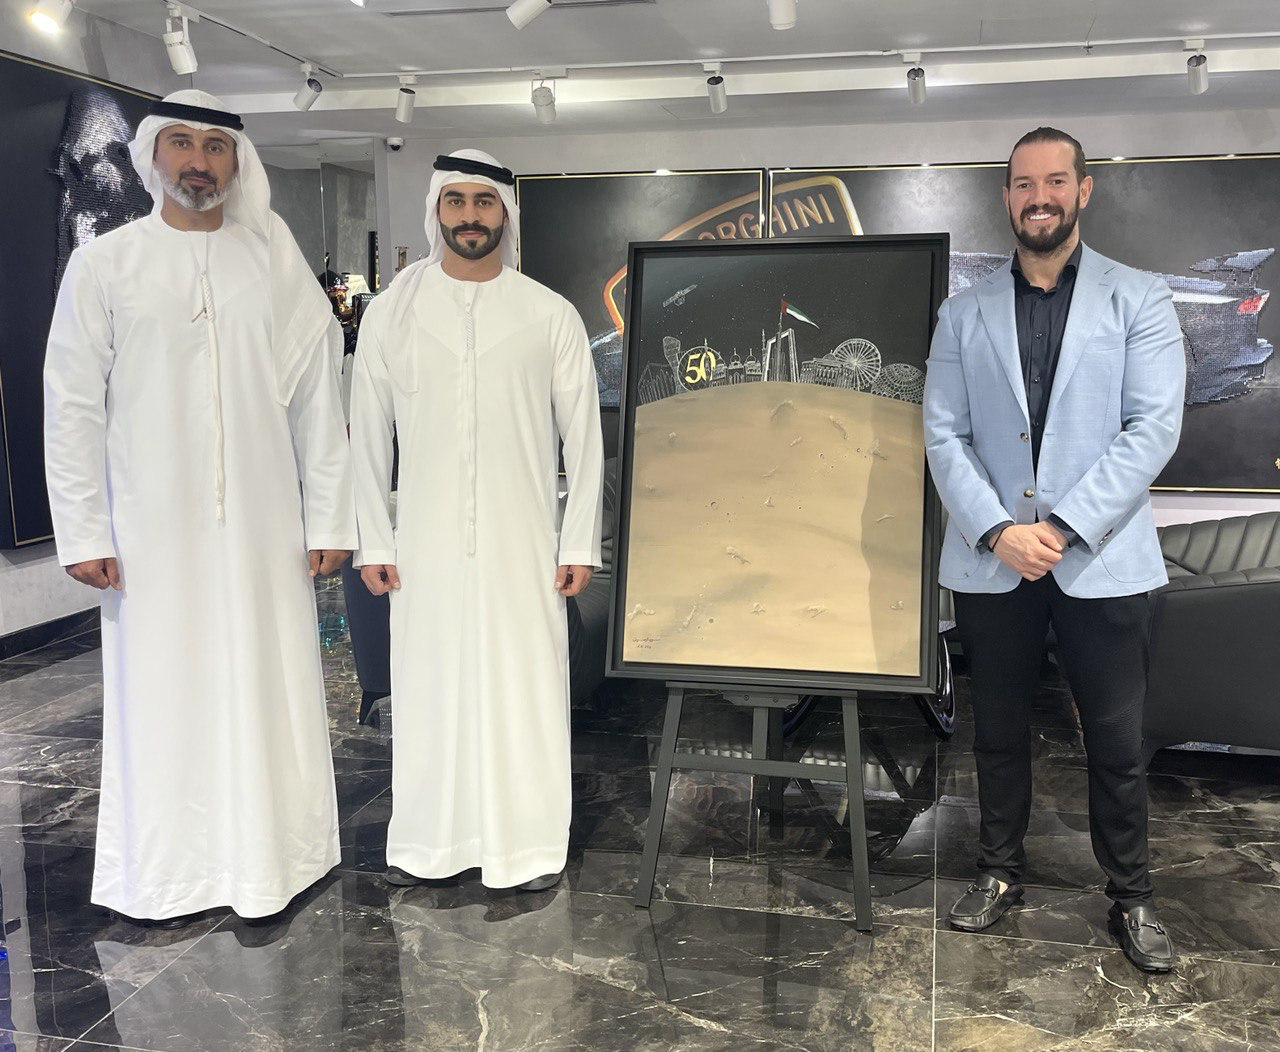 Rare Artworks by Picasso and UAE Royal Family Member to be Auctioned together for the First Time